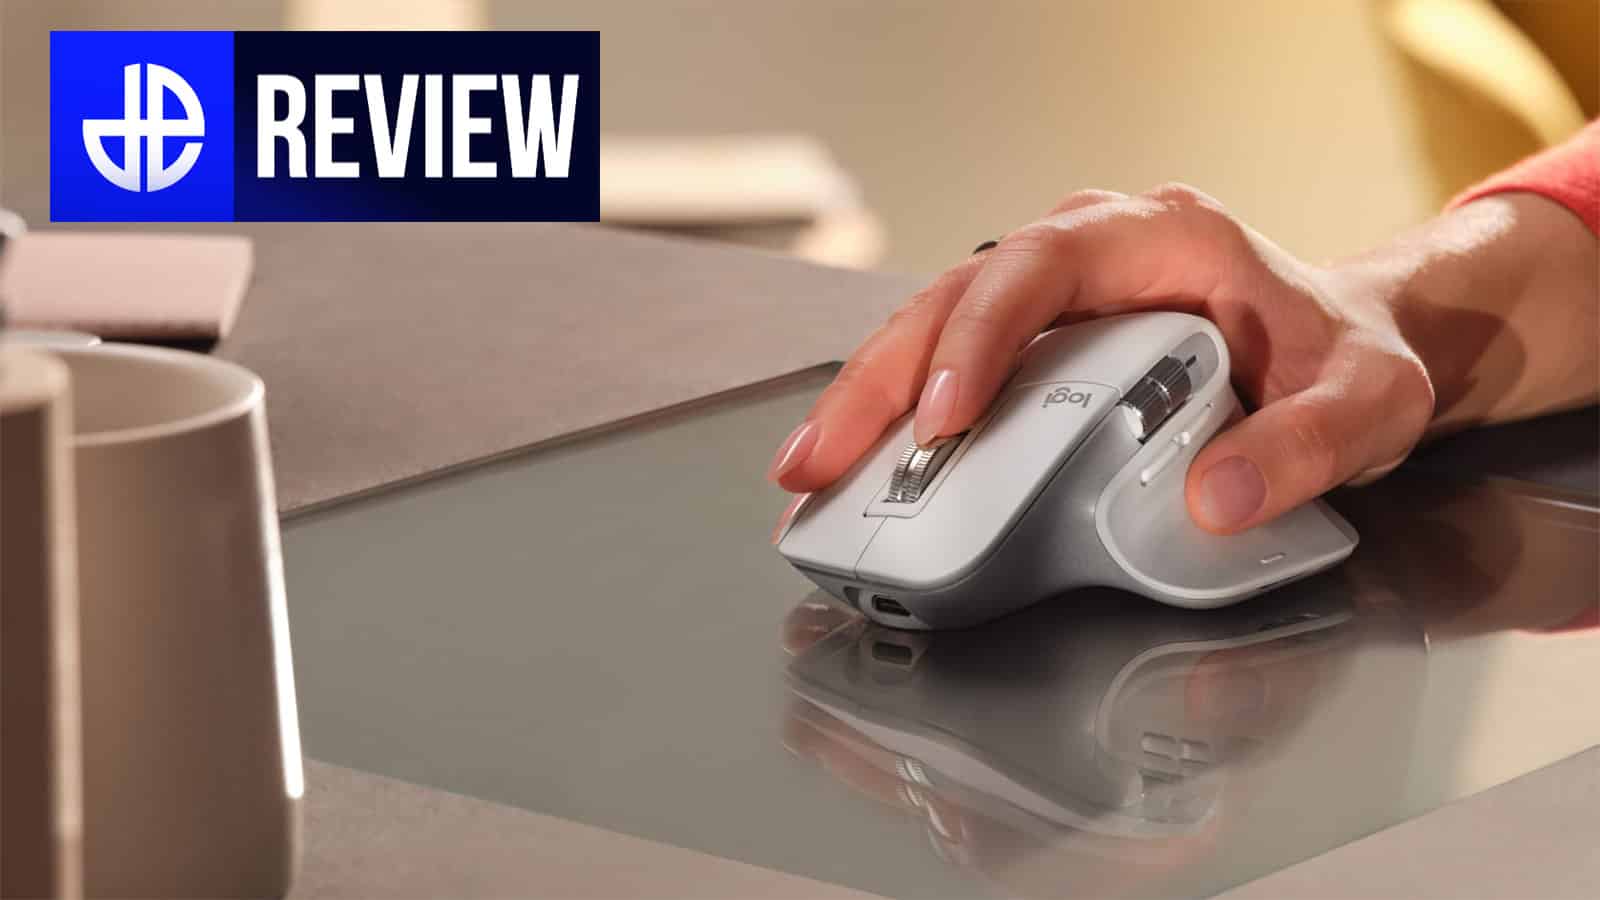 Pair your Mac with Logitech's MX Master 3S mouse while it's down